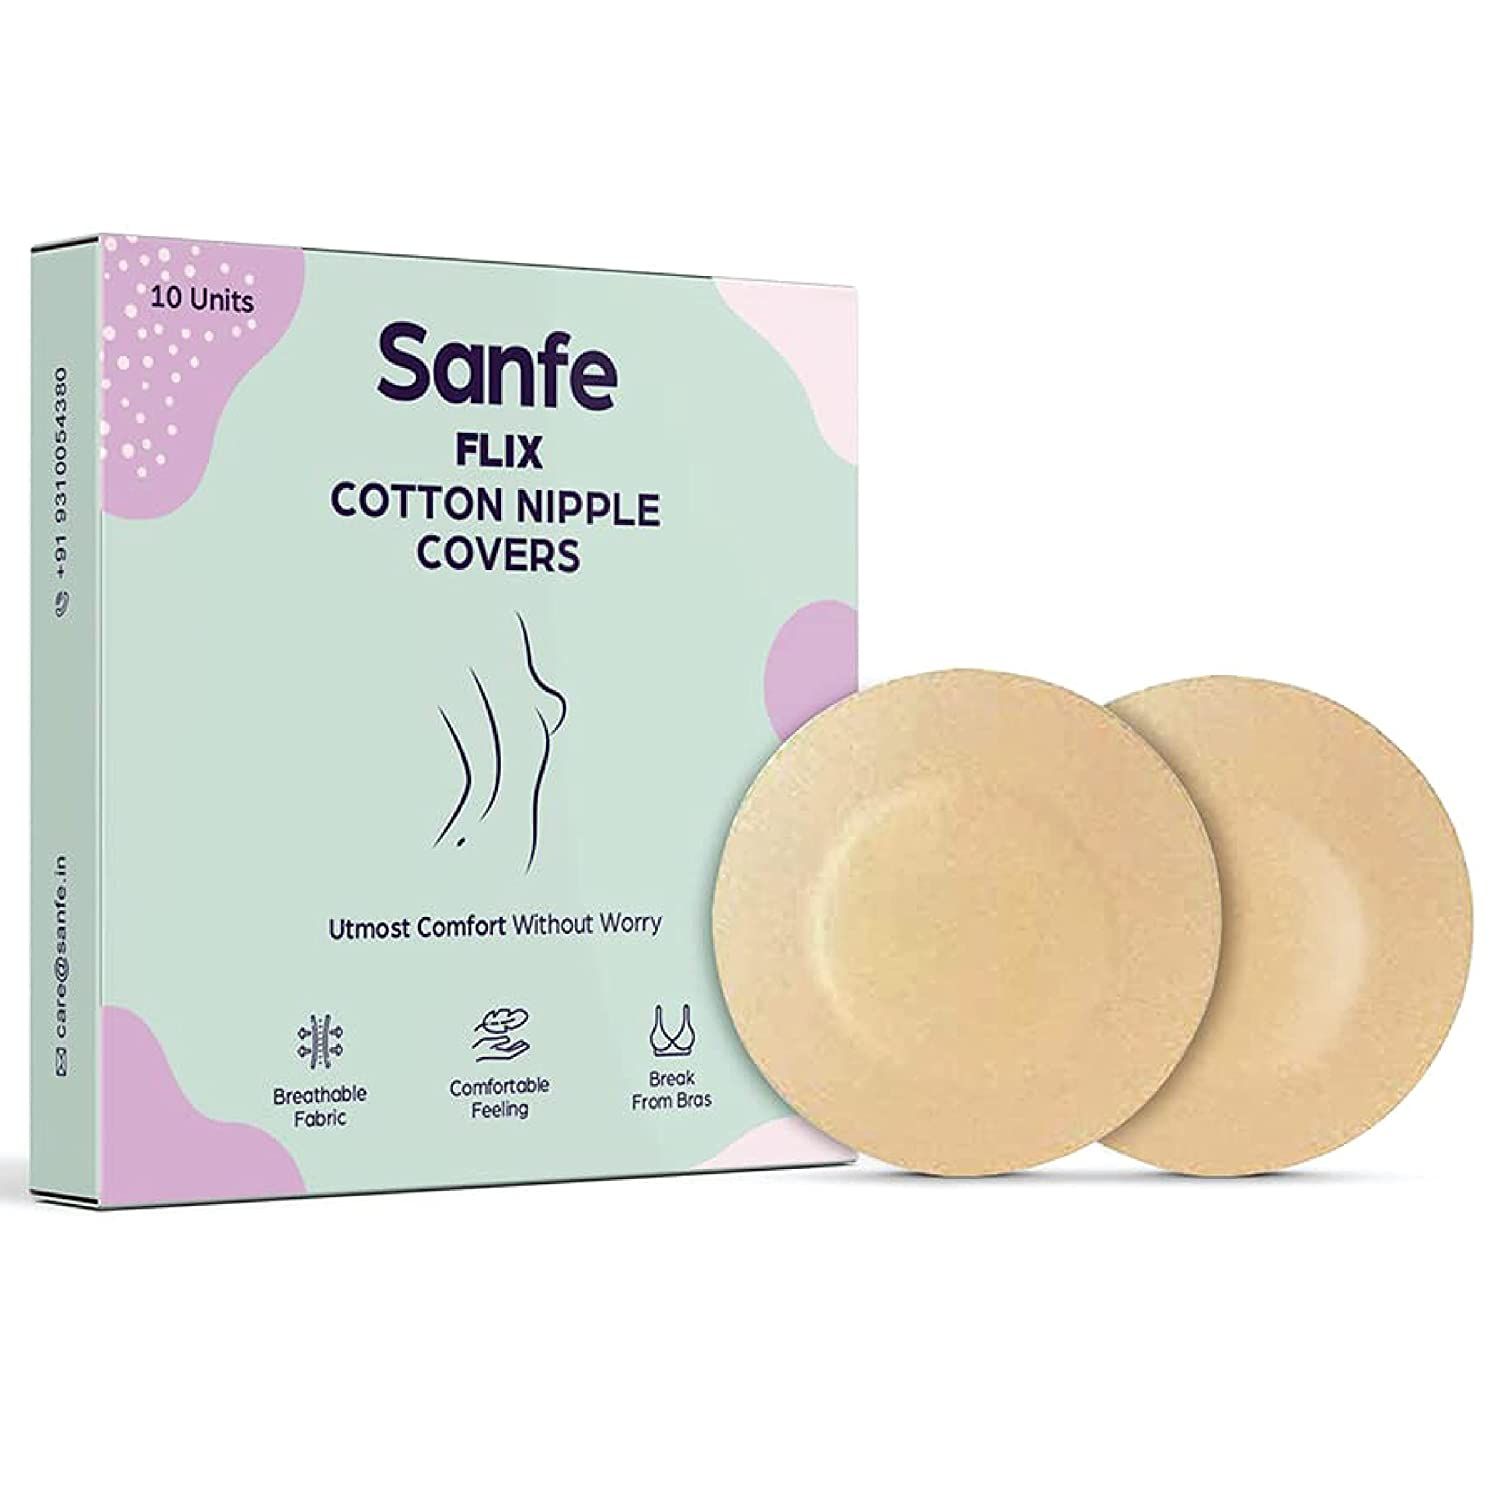 https://media6.ppl-media.com//tr:h-750,w-750,c-at_max,dpr-2/static/img/product/315091/sanfe-flix-cotton-nipple-covers-10-breathable-nipple-pasties-no-show-bra-for-women-skin-friendly-adhesive-disposable_8_display_1674190080_1c12f492.jpg